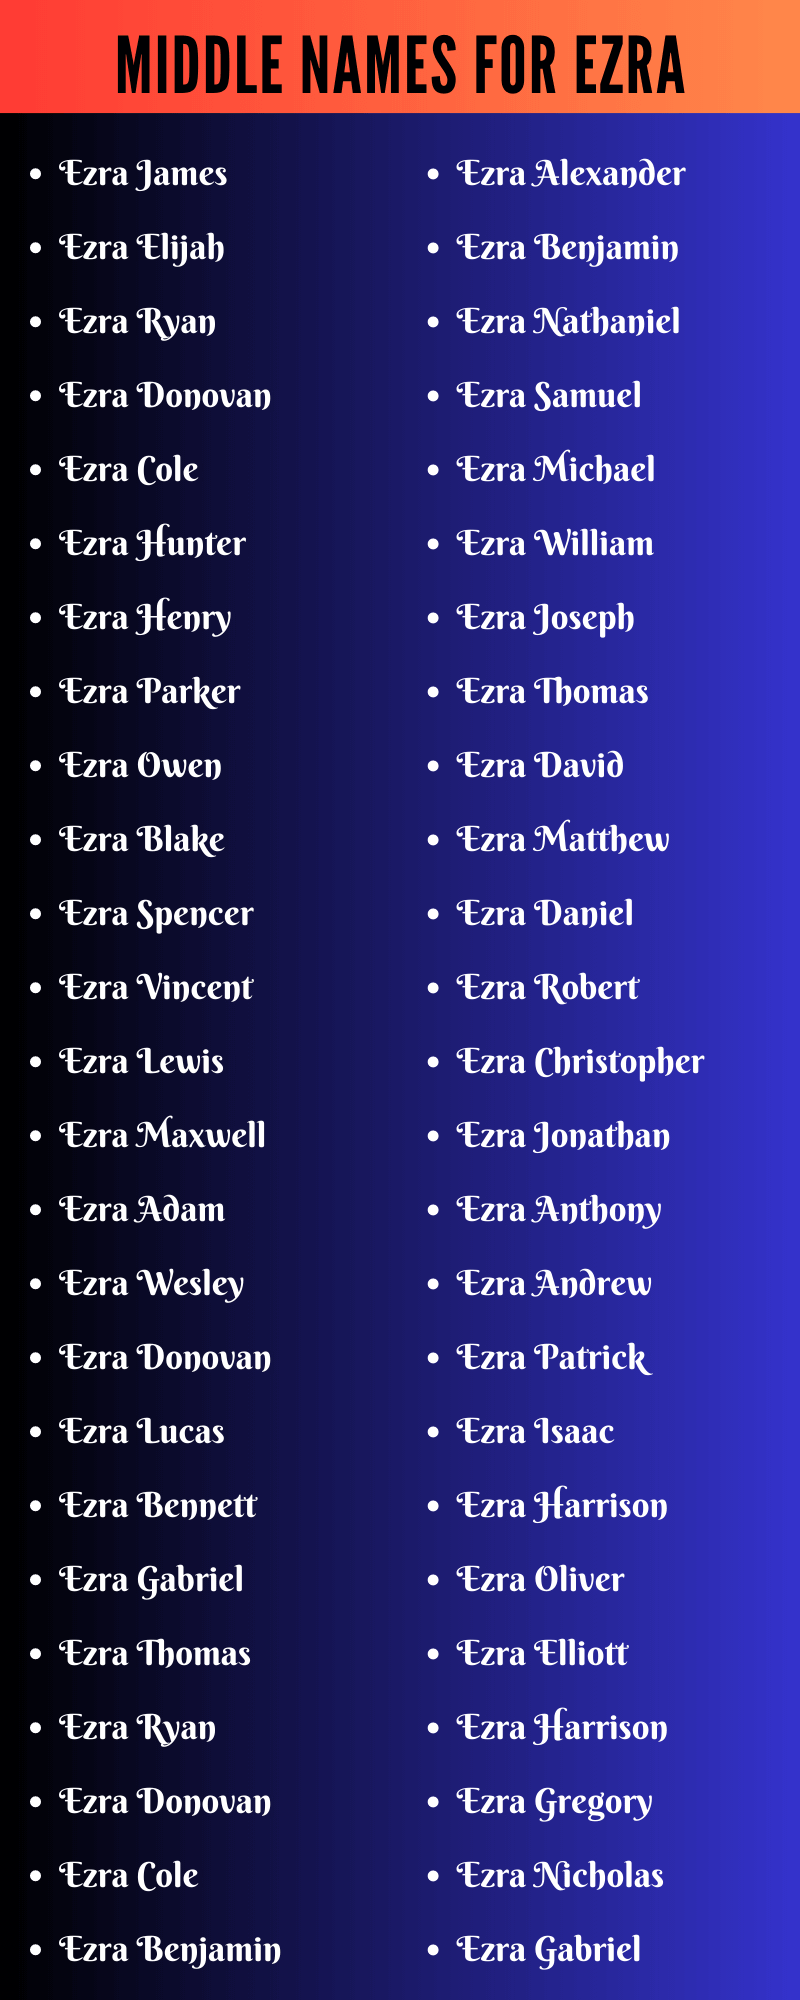 Middle Names For Ezra